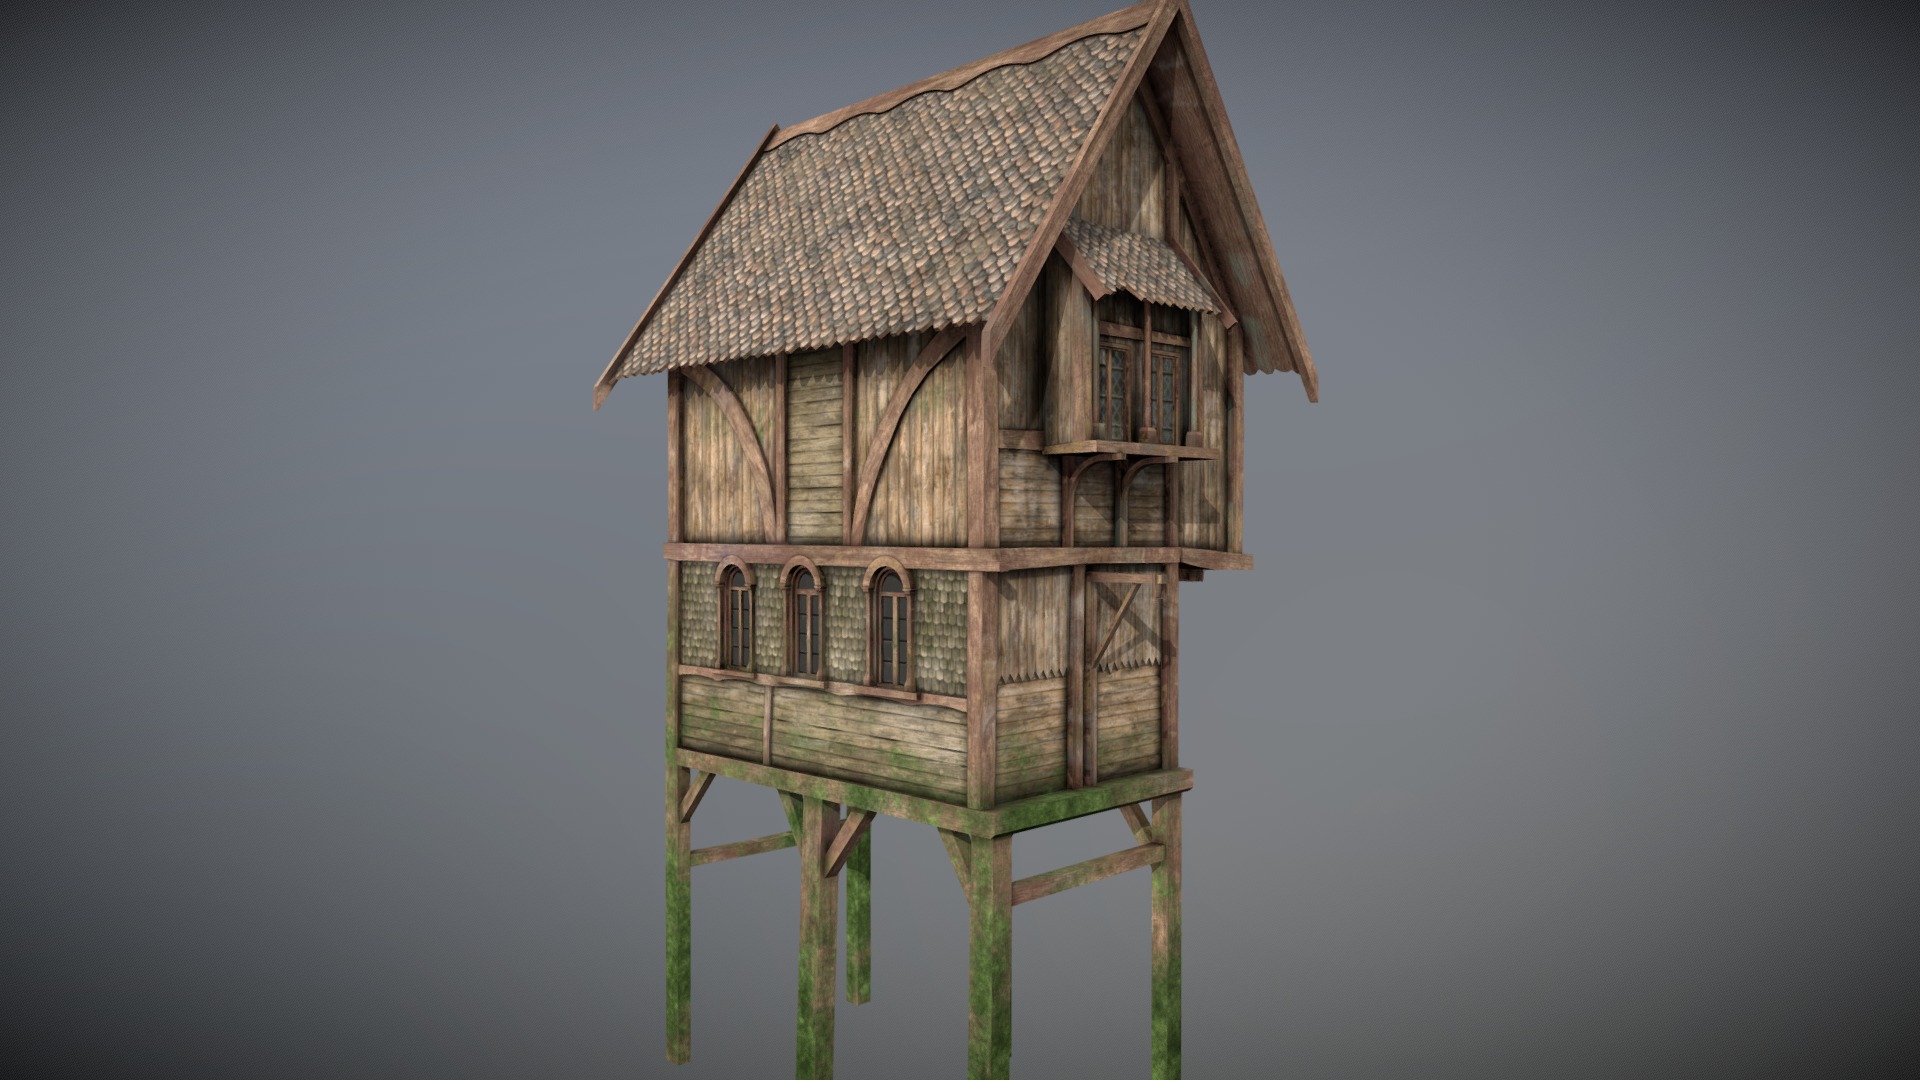 3D model Medieval Lake Village – House 11 with interiors - This is a 3D model of the Medieval Lake Village - House 11 with interiors. The 3D model is about a wooden house on a small island.